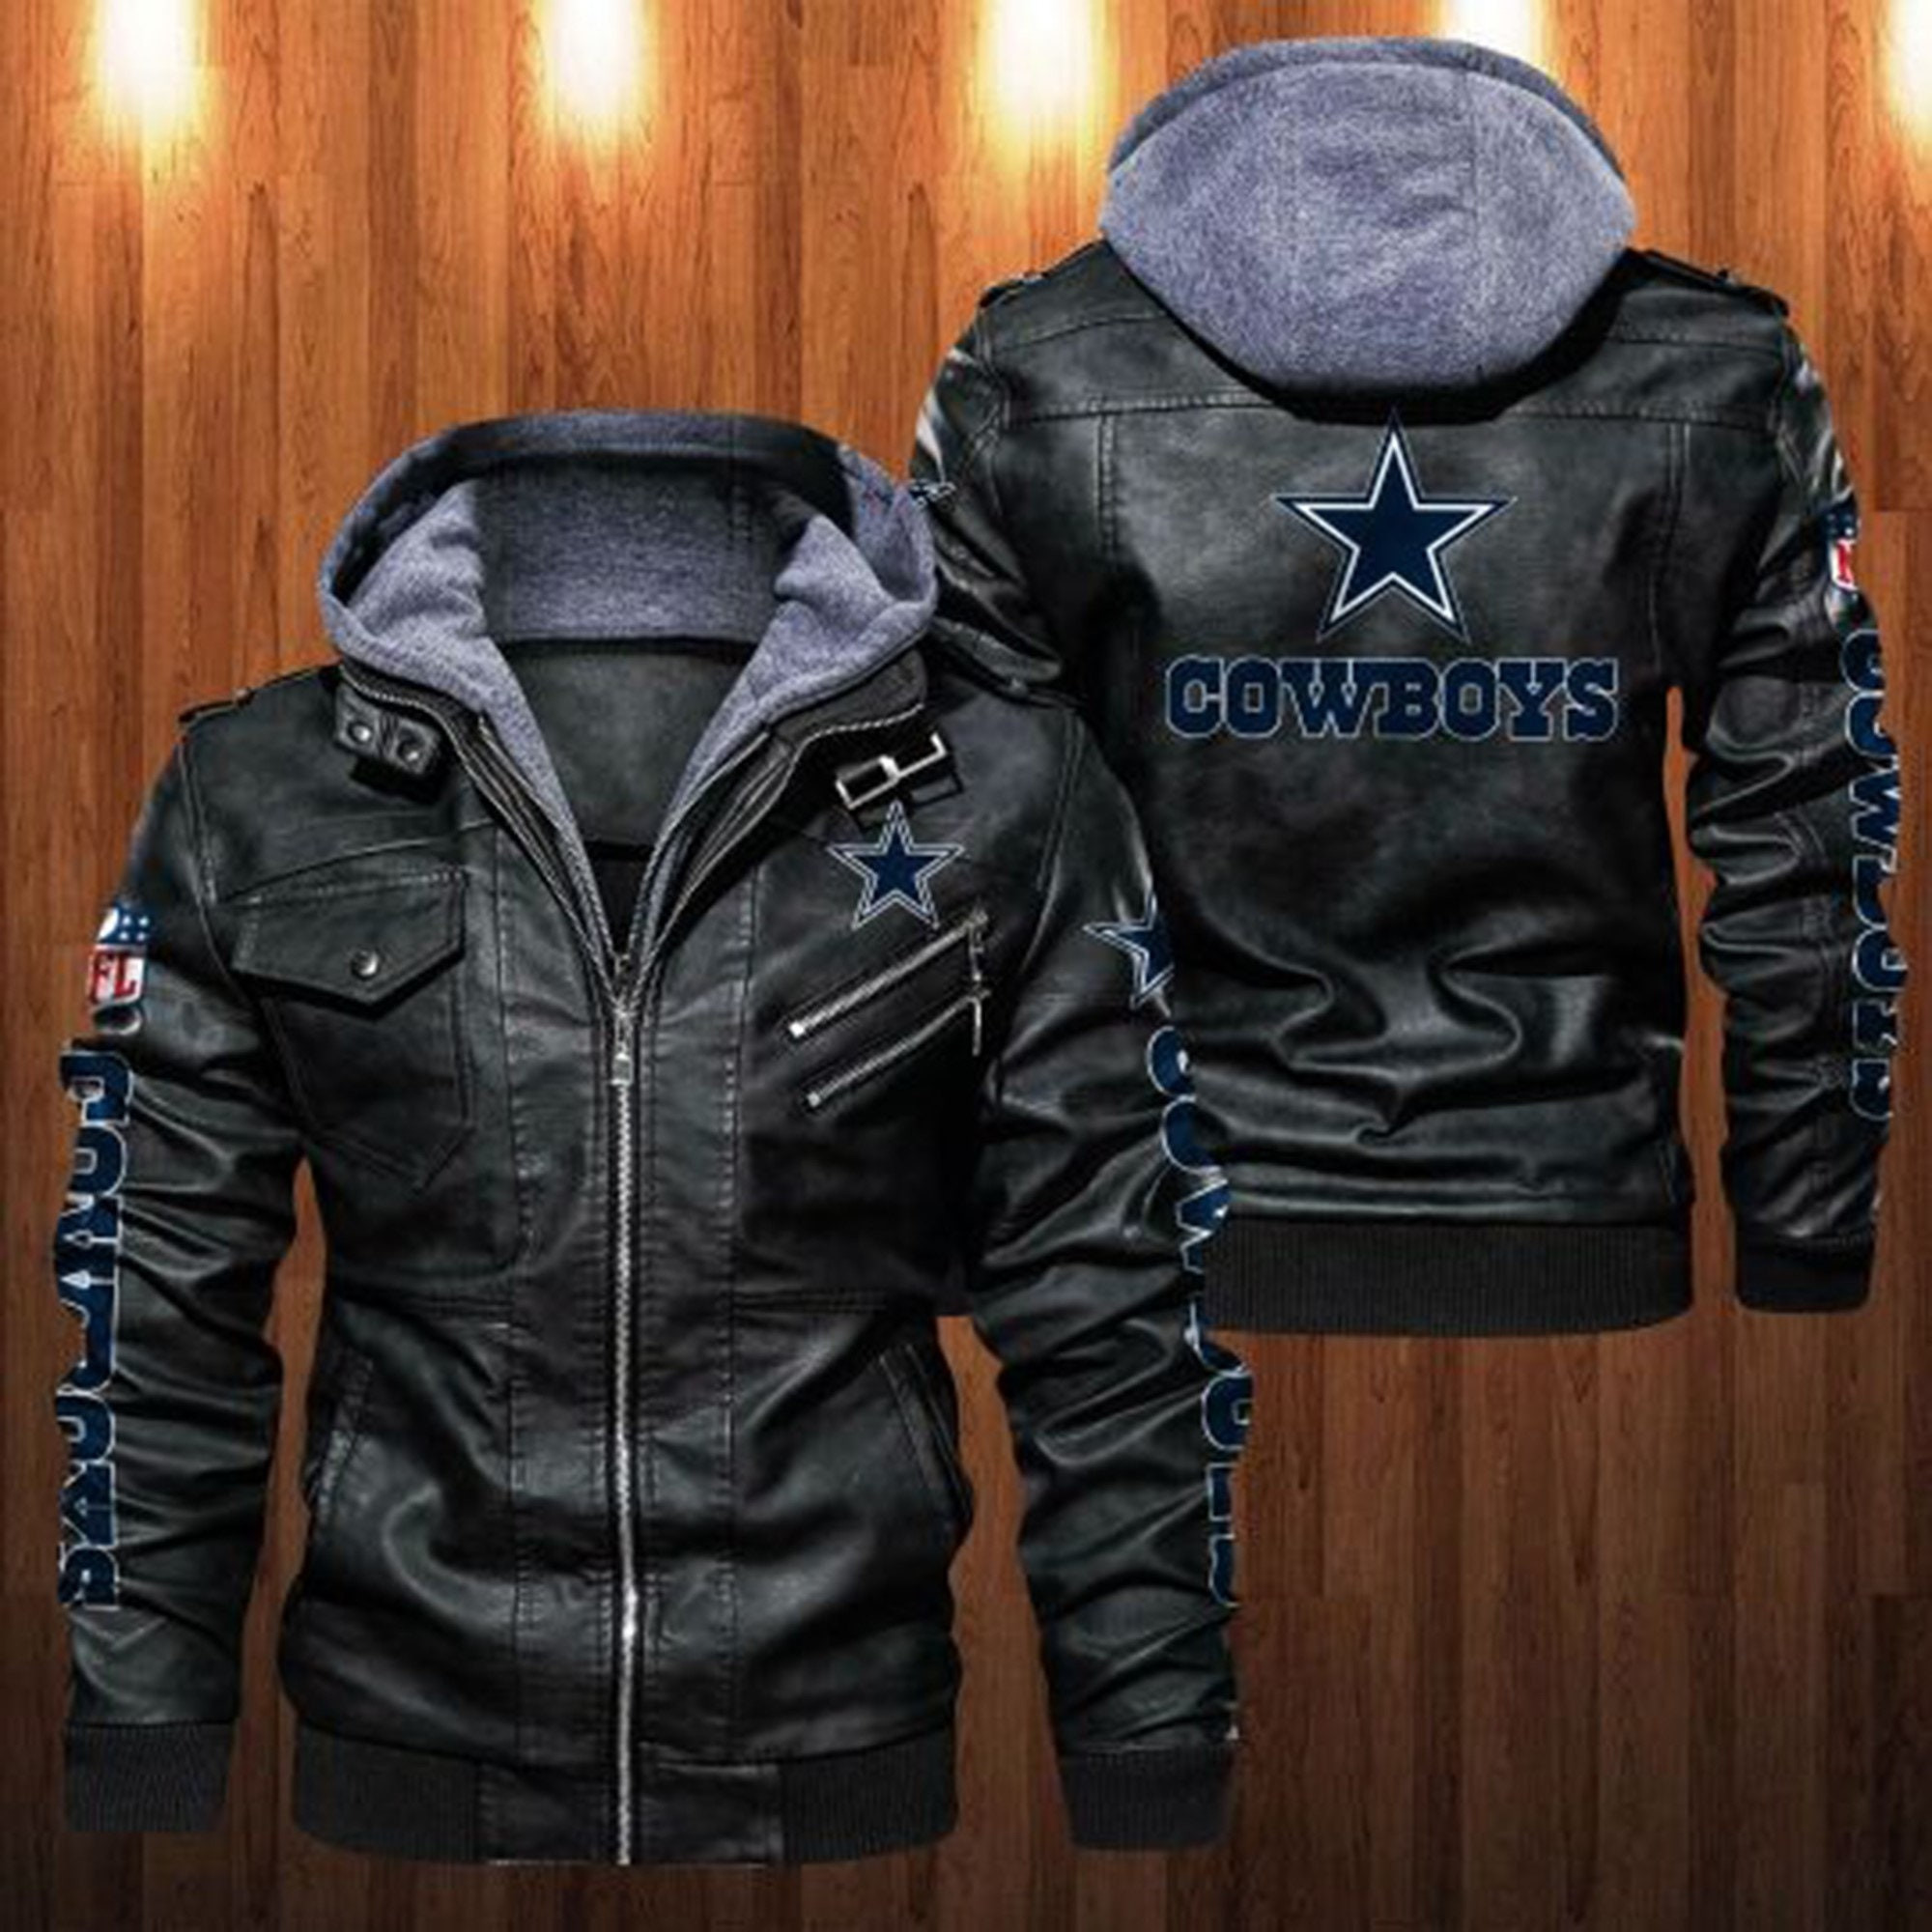 These Amazing Leather Jacket will add to the appeal of your outfit 46